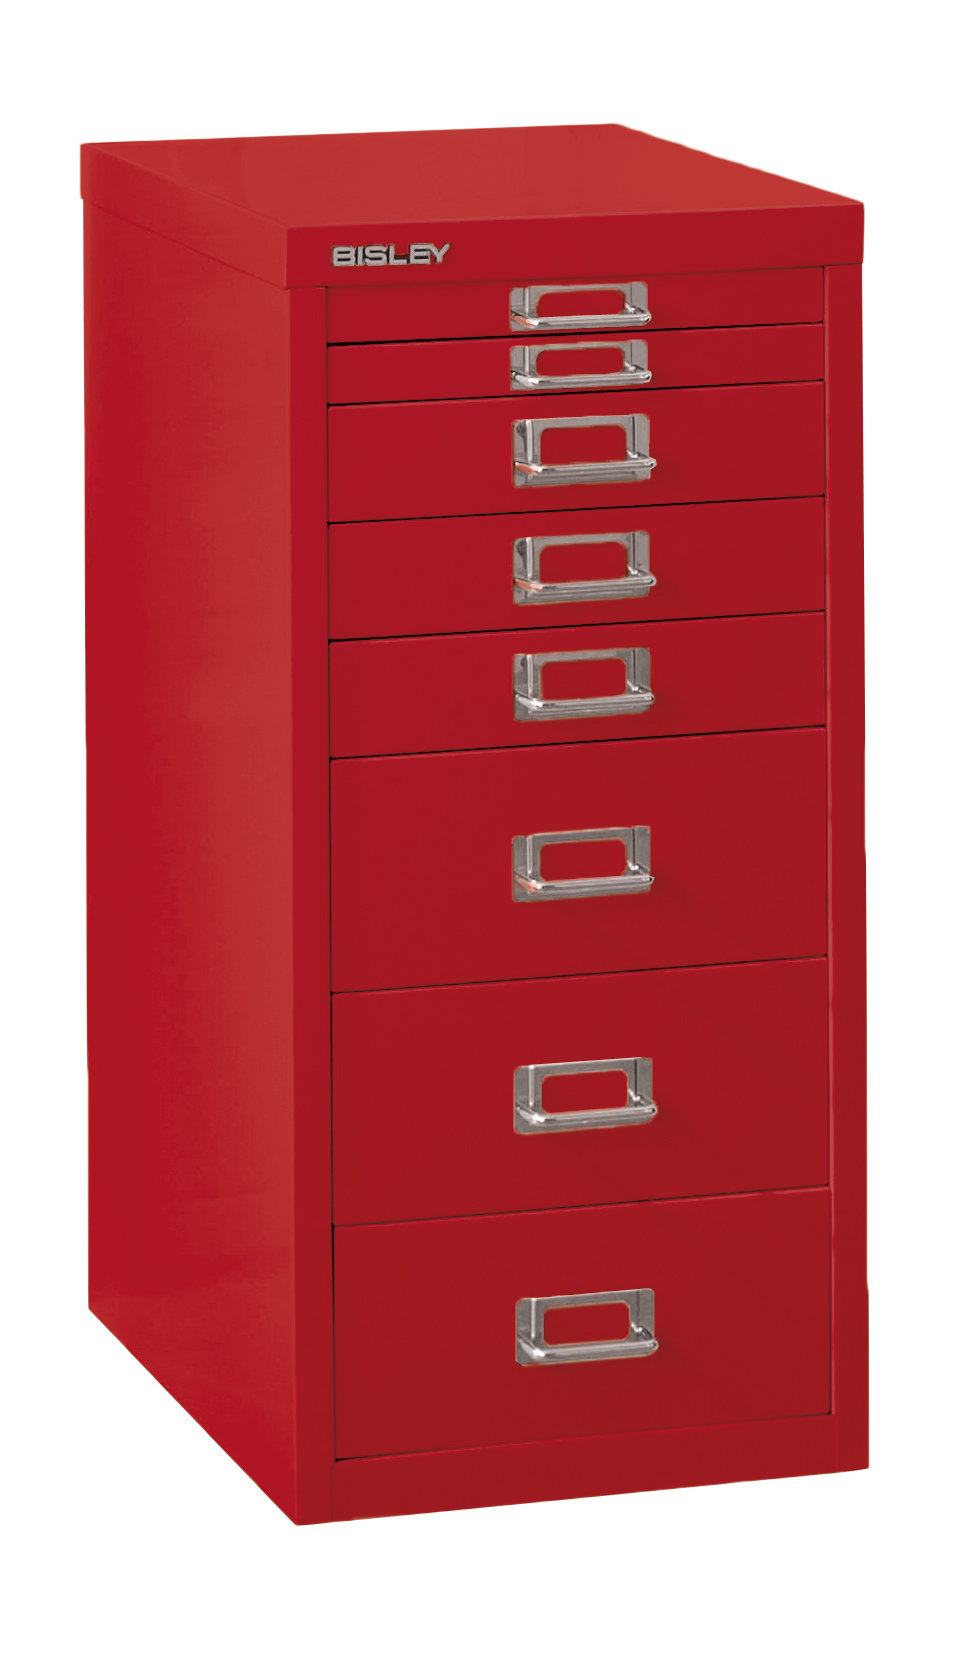 Bisley 8 Drawer Vertical Filing Cabinet Wayfairca within dimensions 963 X 1656